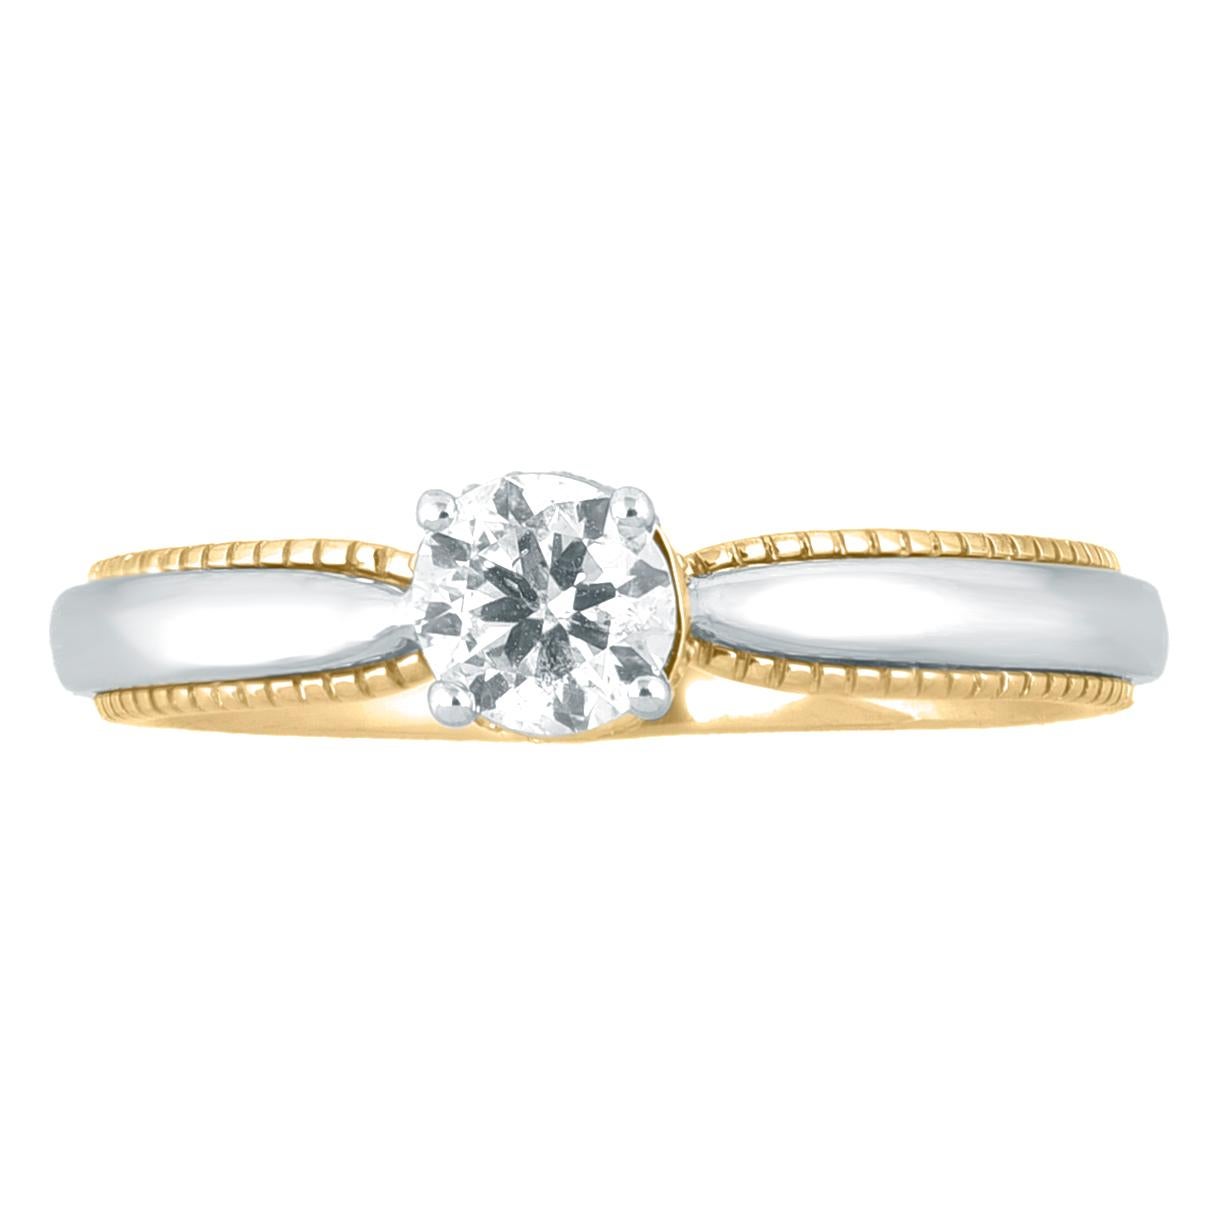 This classic engagement ring is studded with single cut & brilliant cut 21 diamond in pave and prong setting. This ring is designed in 14-karat two-tone gold. The diamonds are graded H-I Color, I-2 Clarity.